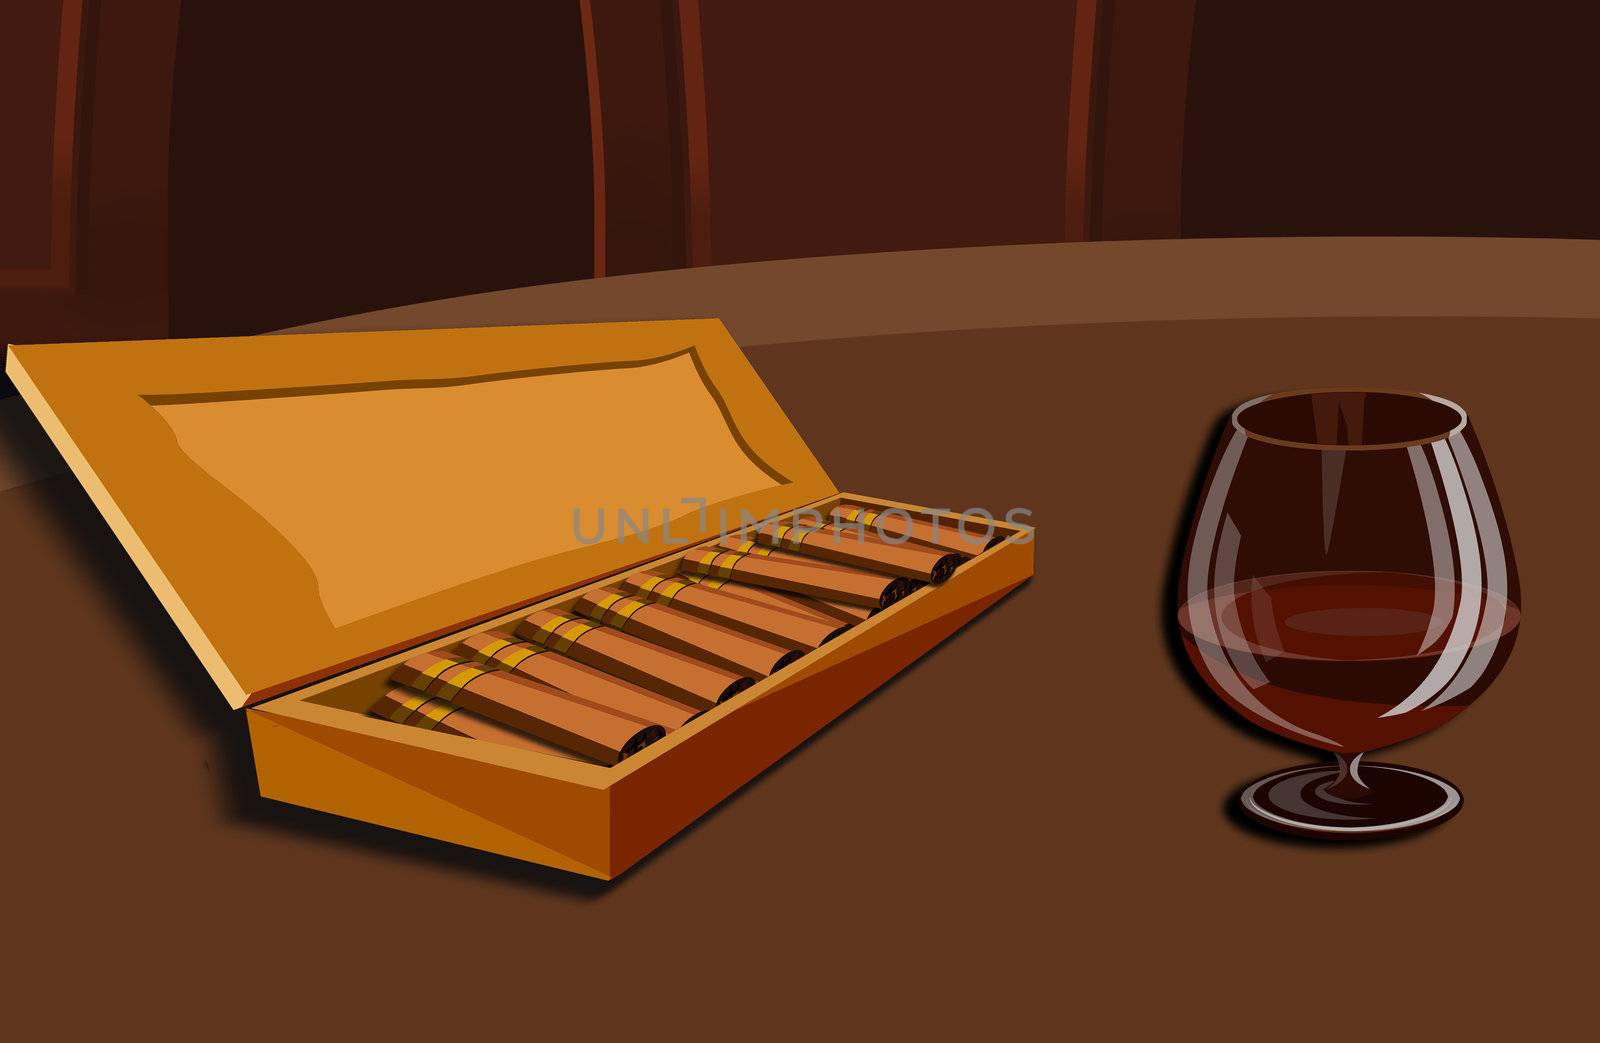 It is a tasty cup of cognac with a cigar